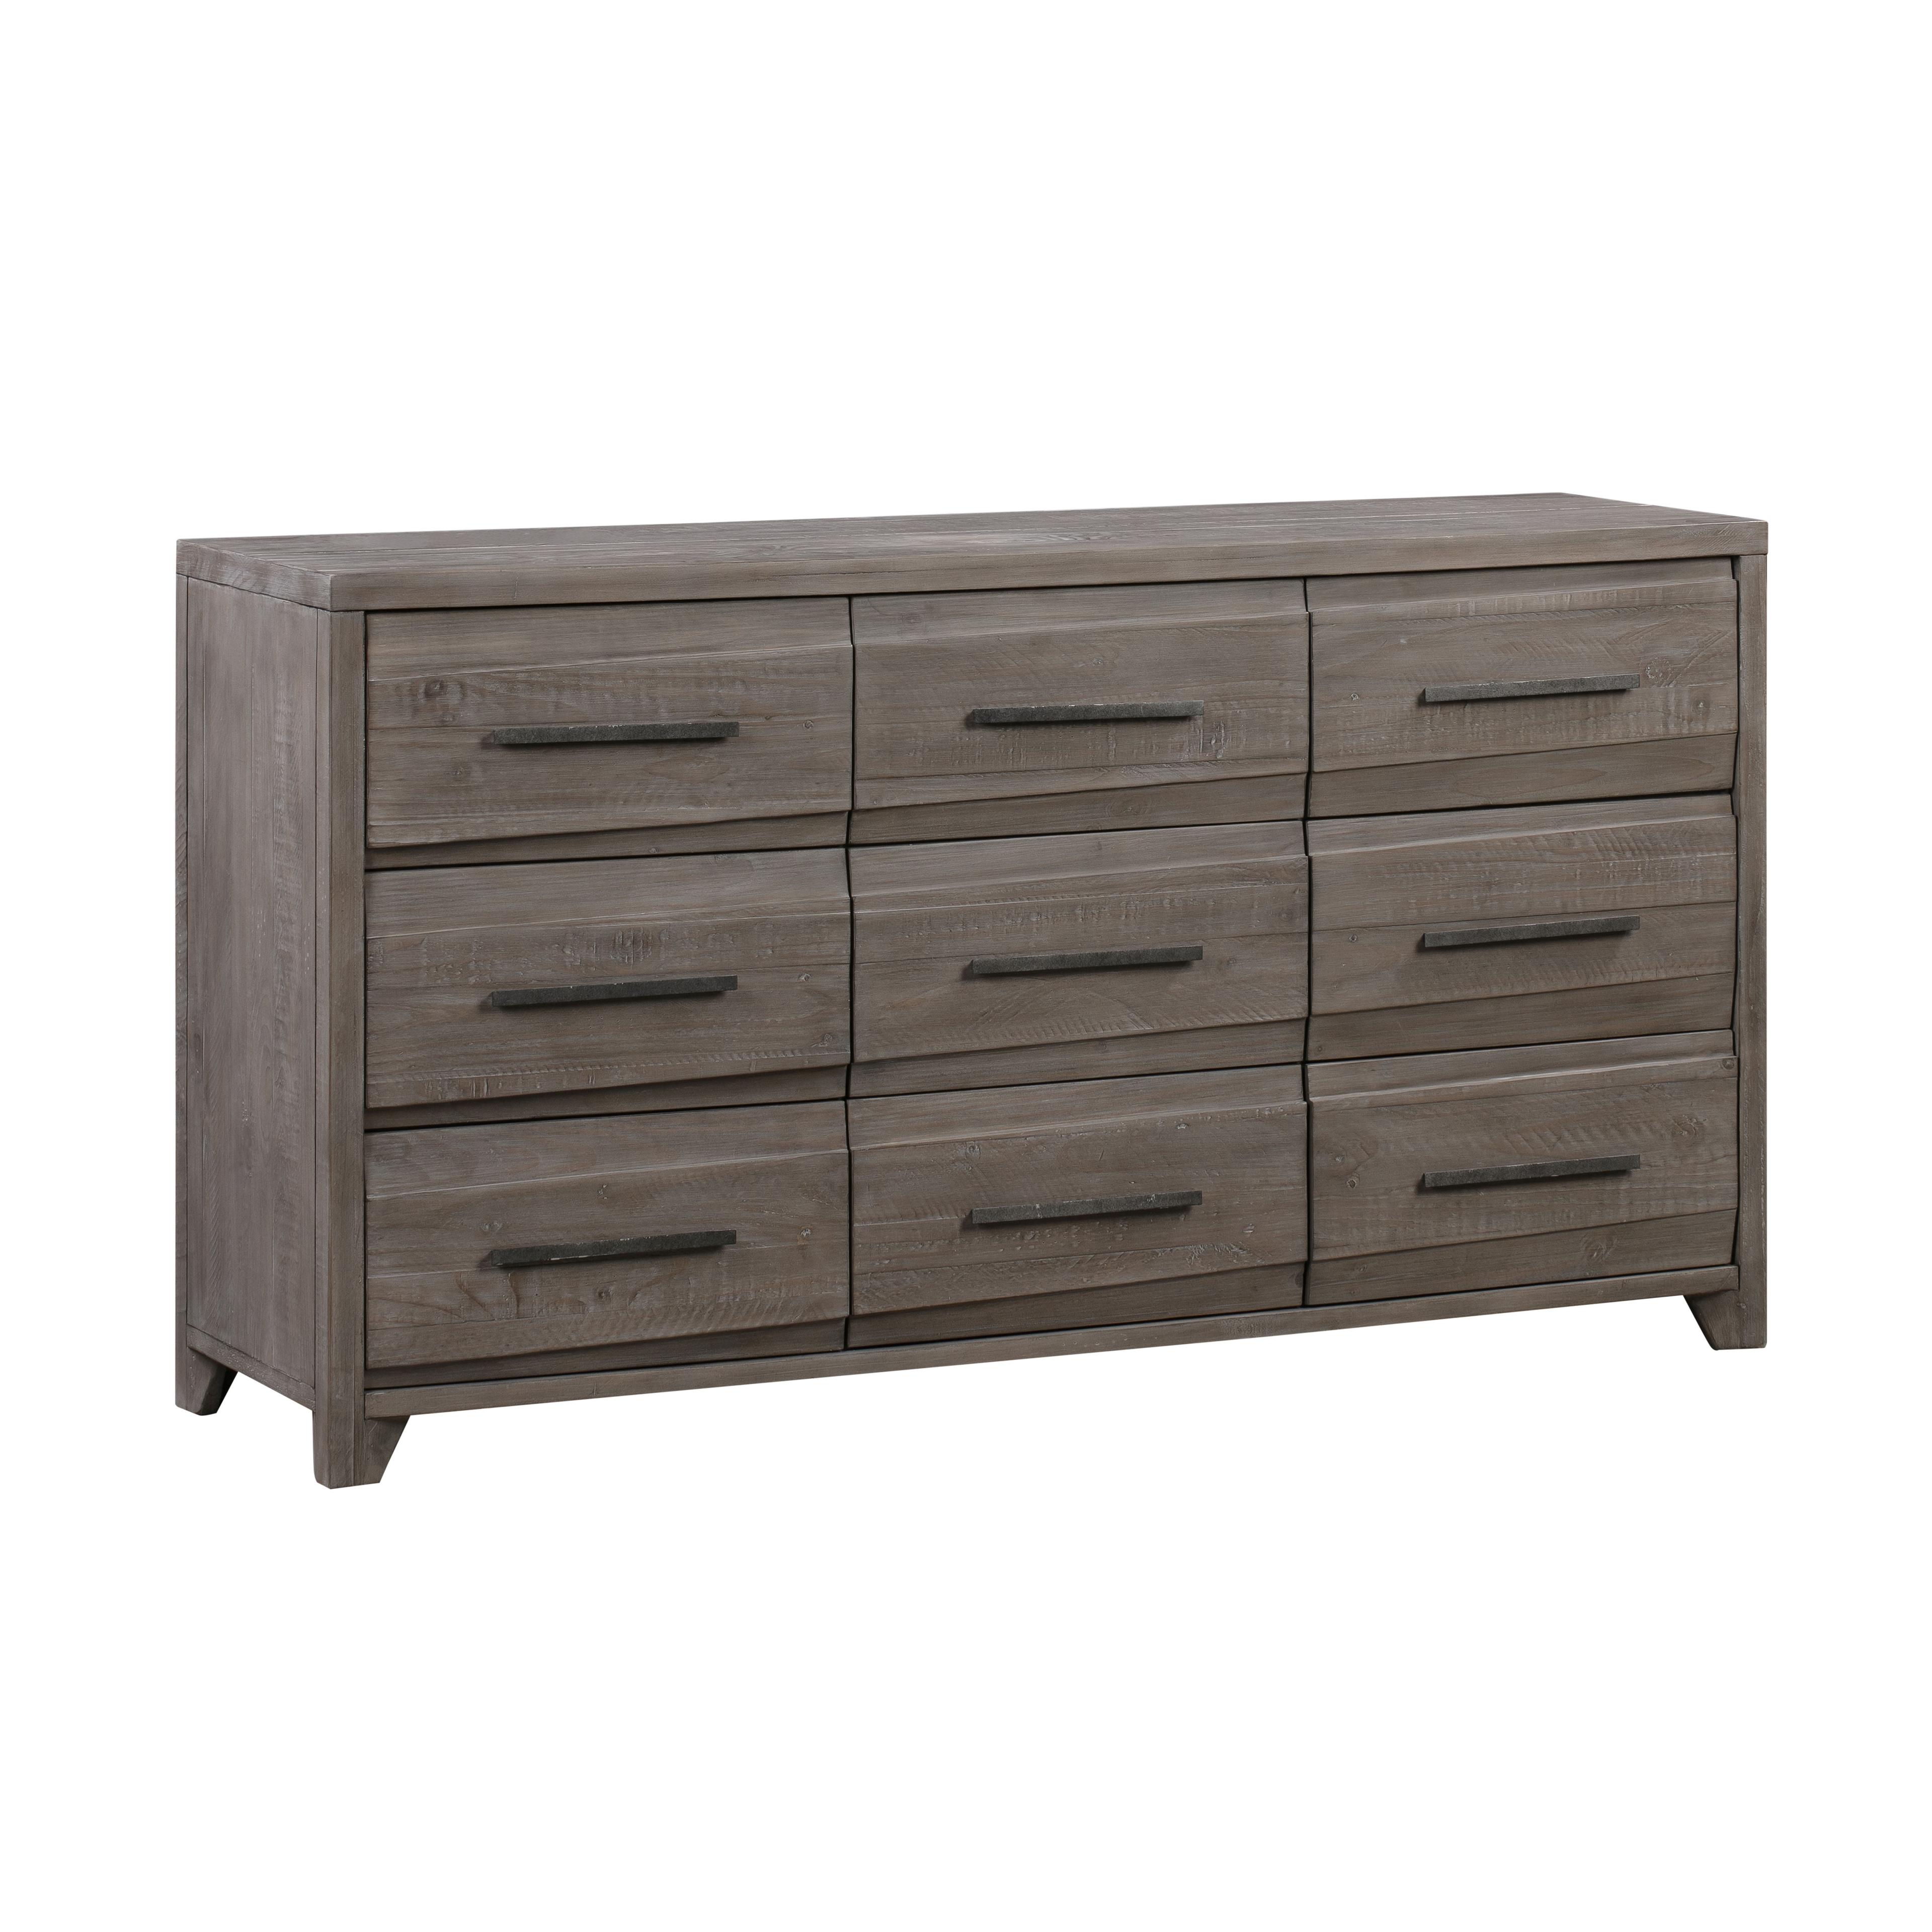 Sahara Tan Solid Pine 9-Drawer Dresser with Mirror and Felt Lined Drawers